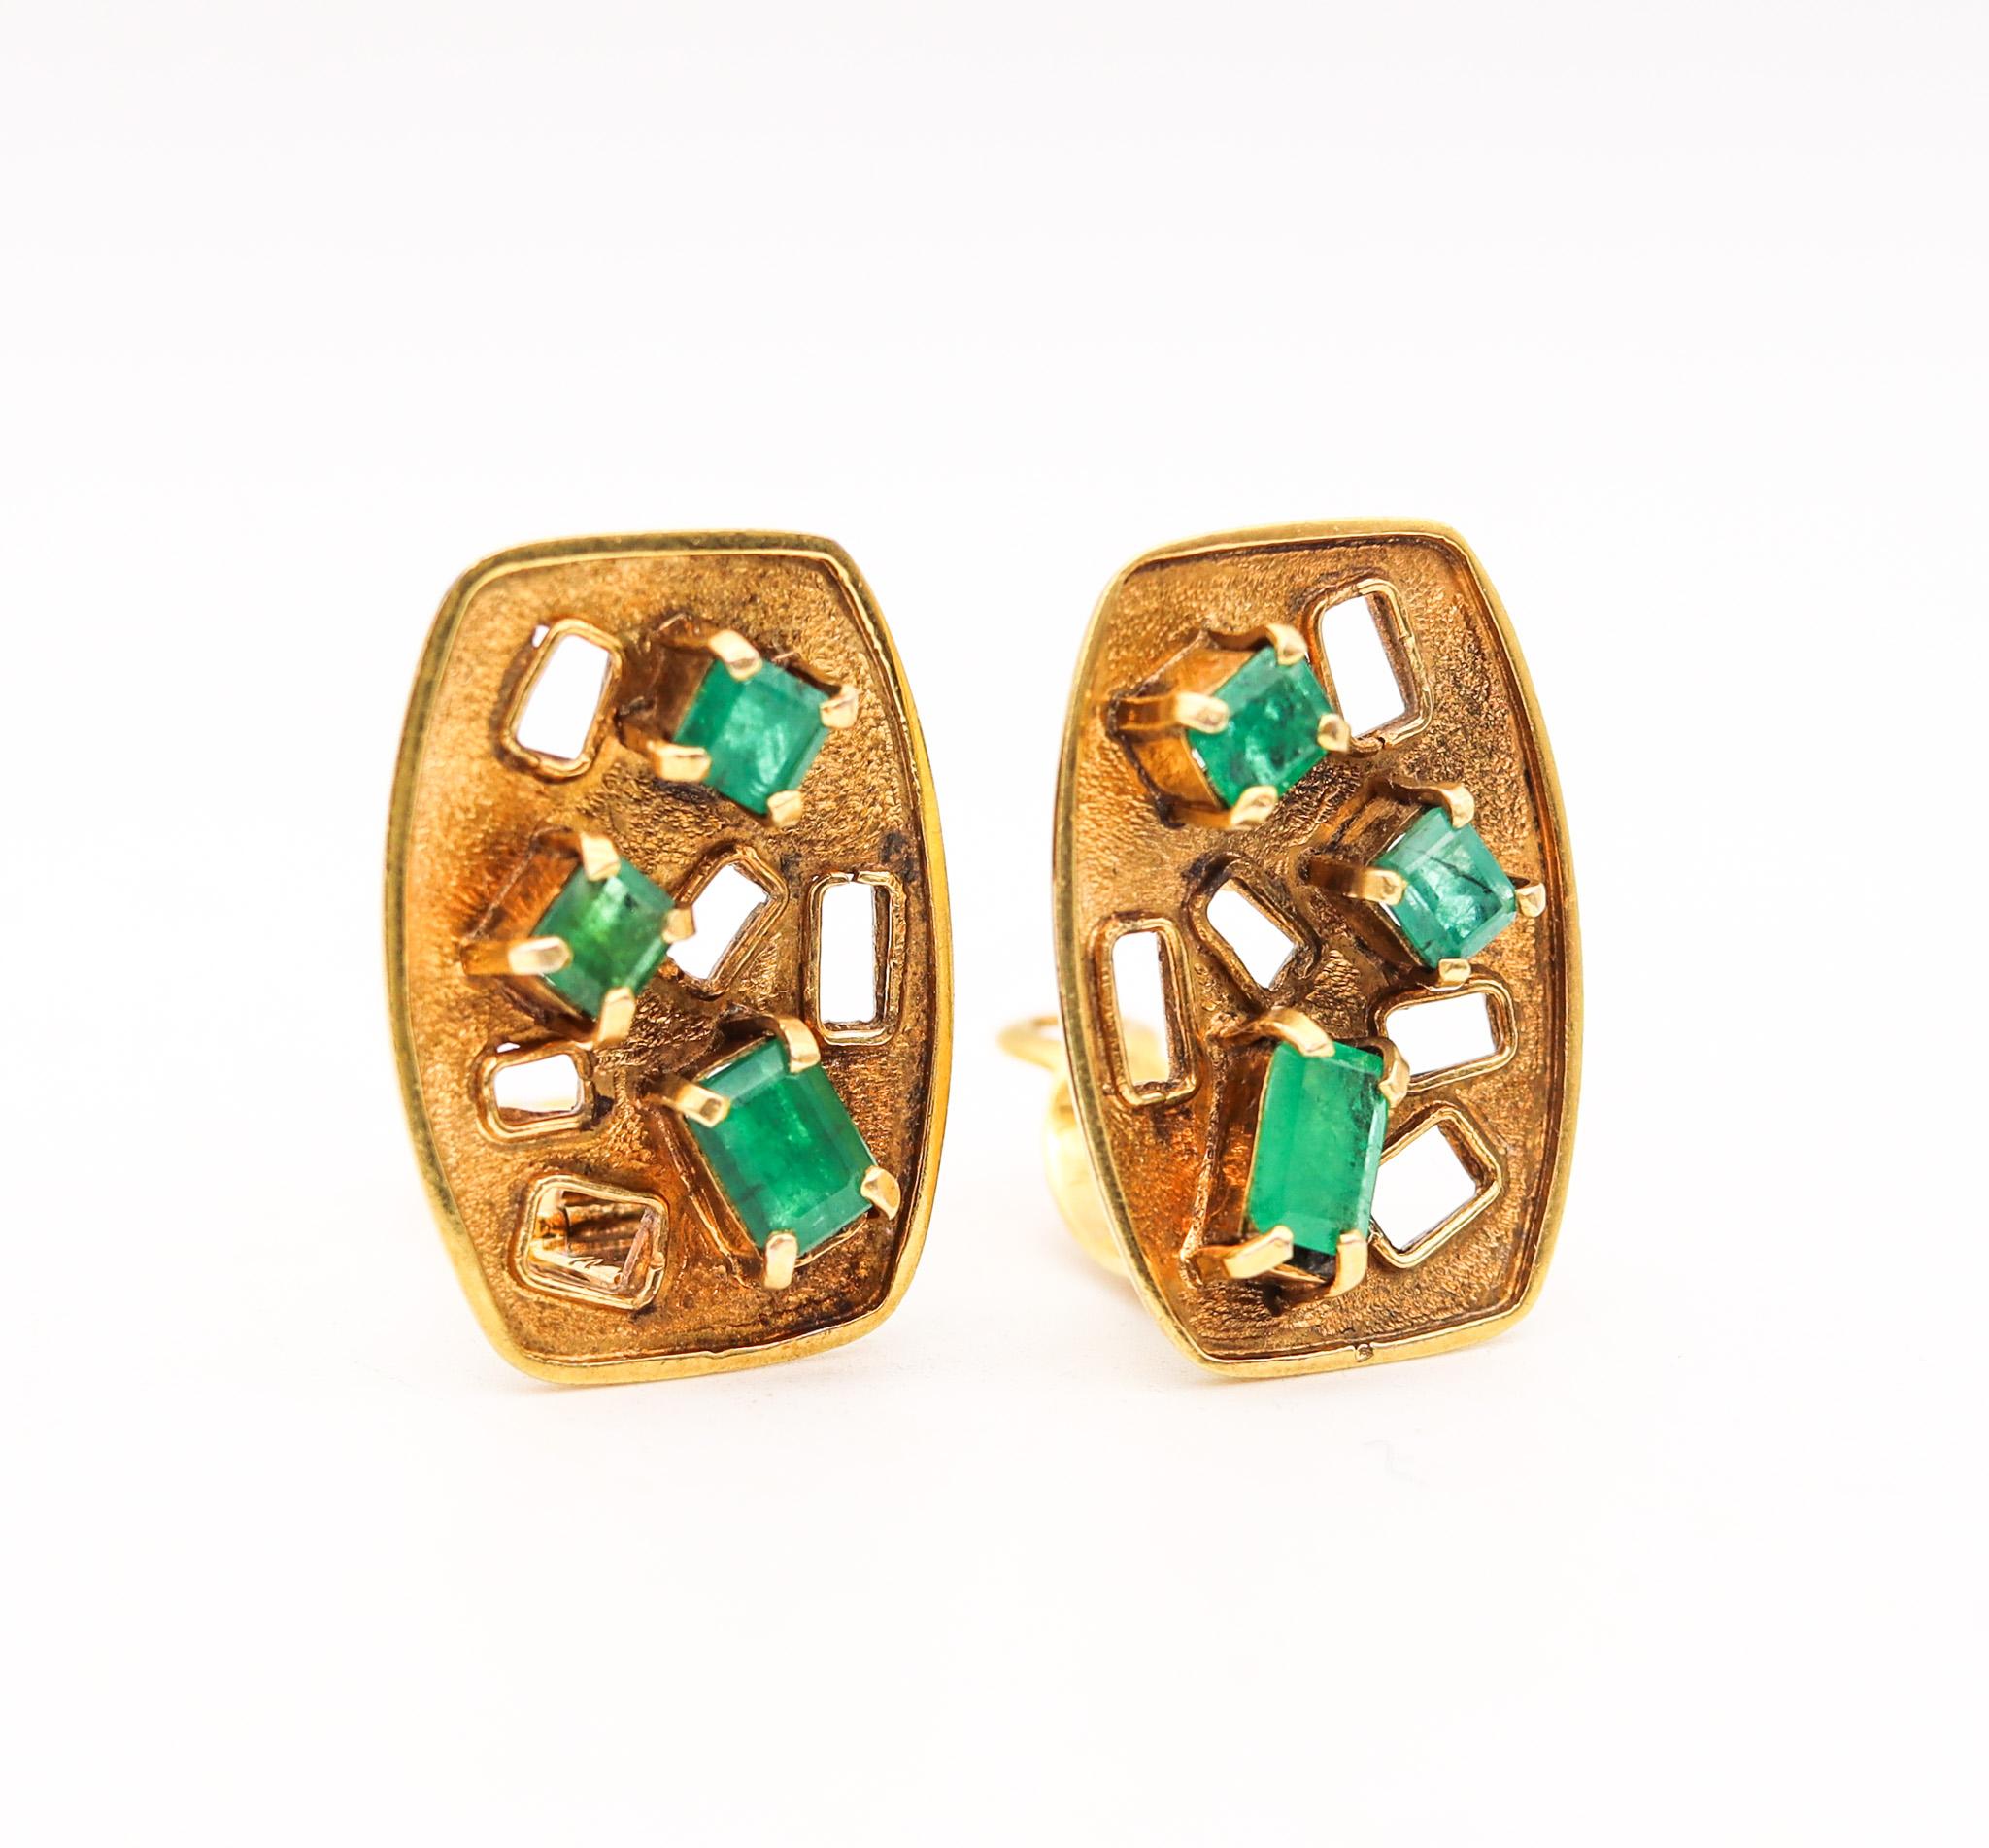 Retro modernist earrings with emeralds designed by Bruno Guidi.

Gorgeous three dimensional pieces of wearable art, created in Brazil by the designer and goldsmith Bruno Guidi, back in the 1970. This pair of earrings has been crafted as an sculpture